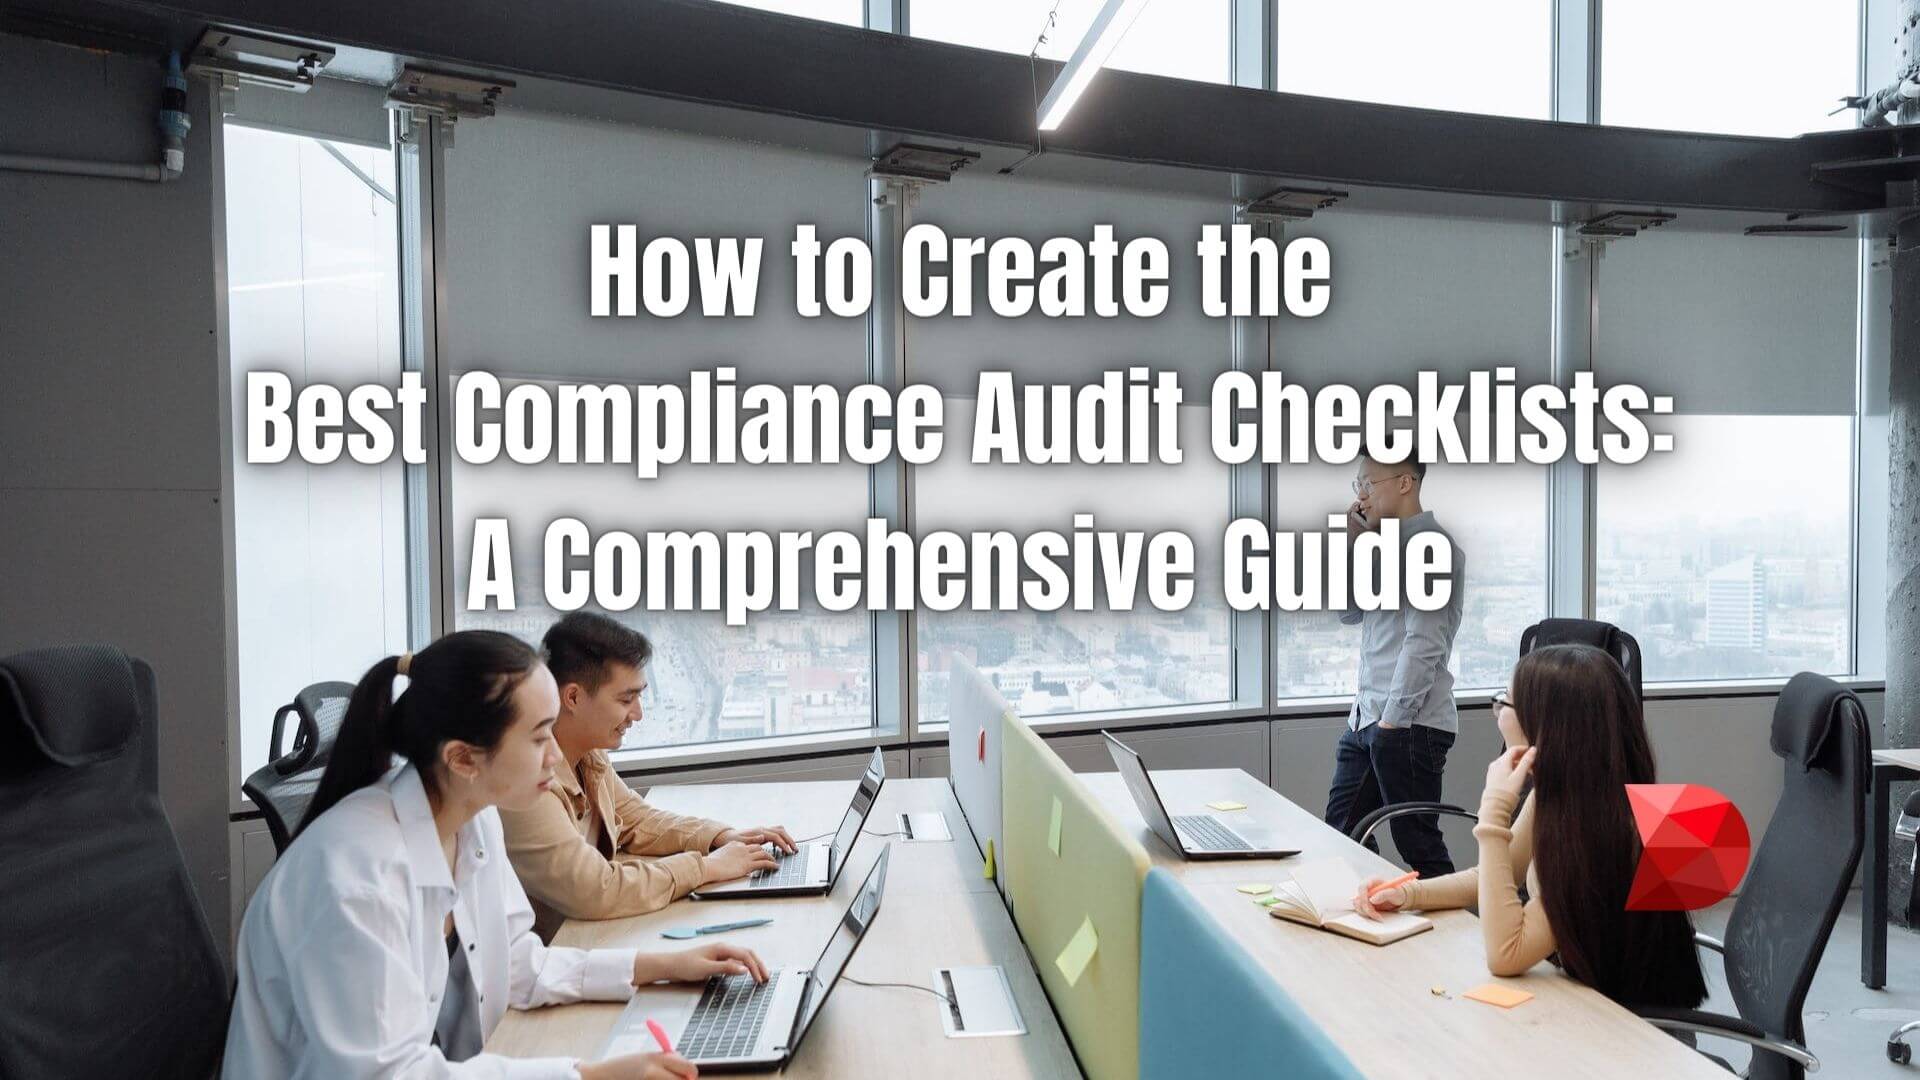 Master compliance audit checklists with these expert tips! Click here to learn how to create top-notch checklists for seamless compliance.